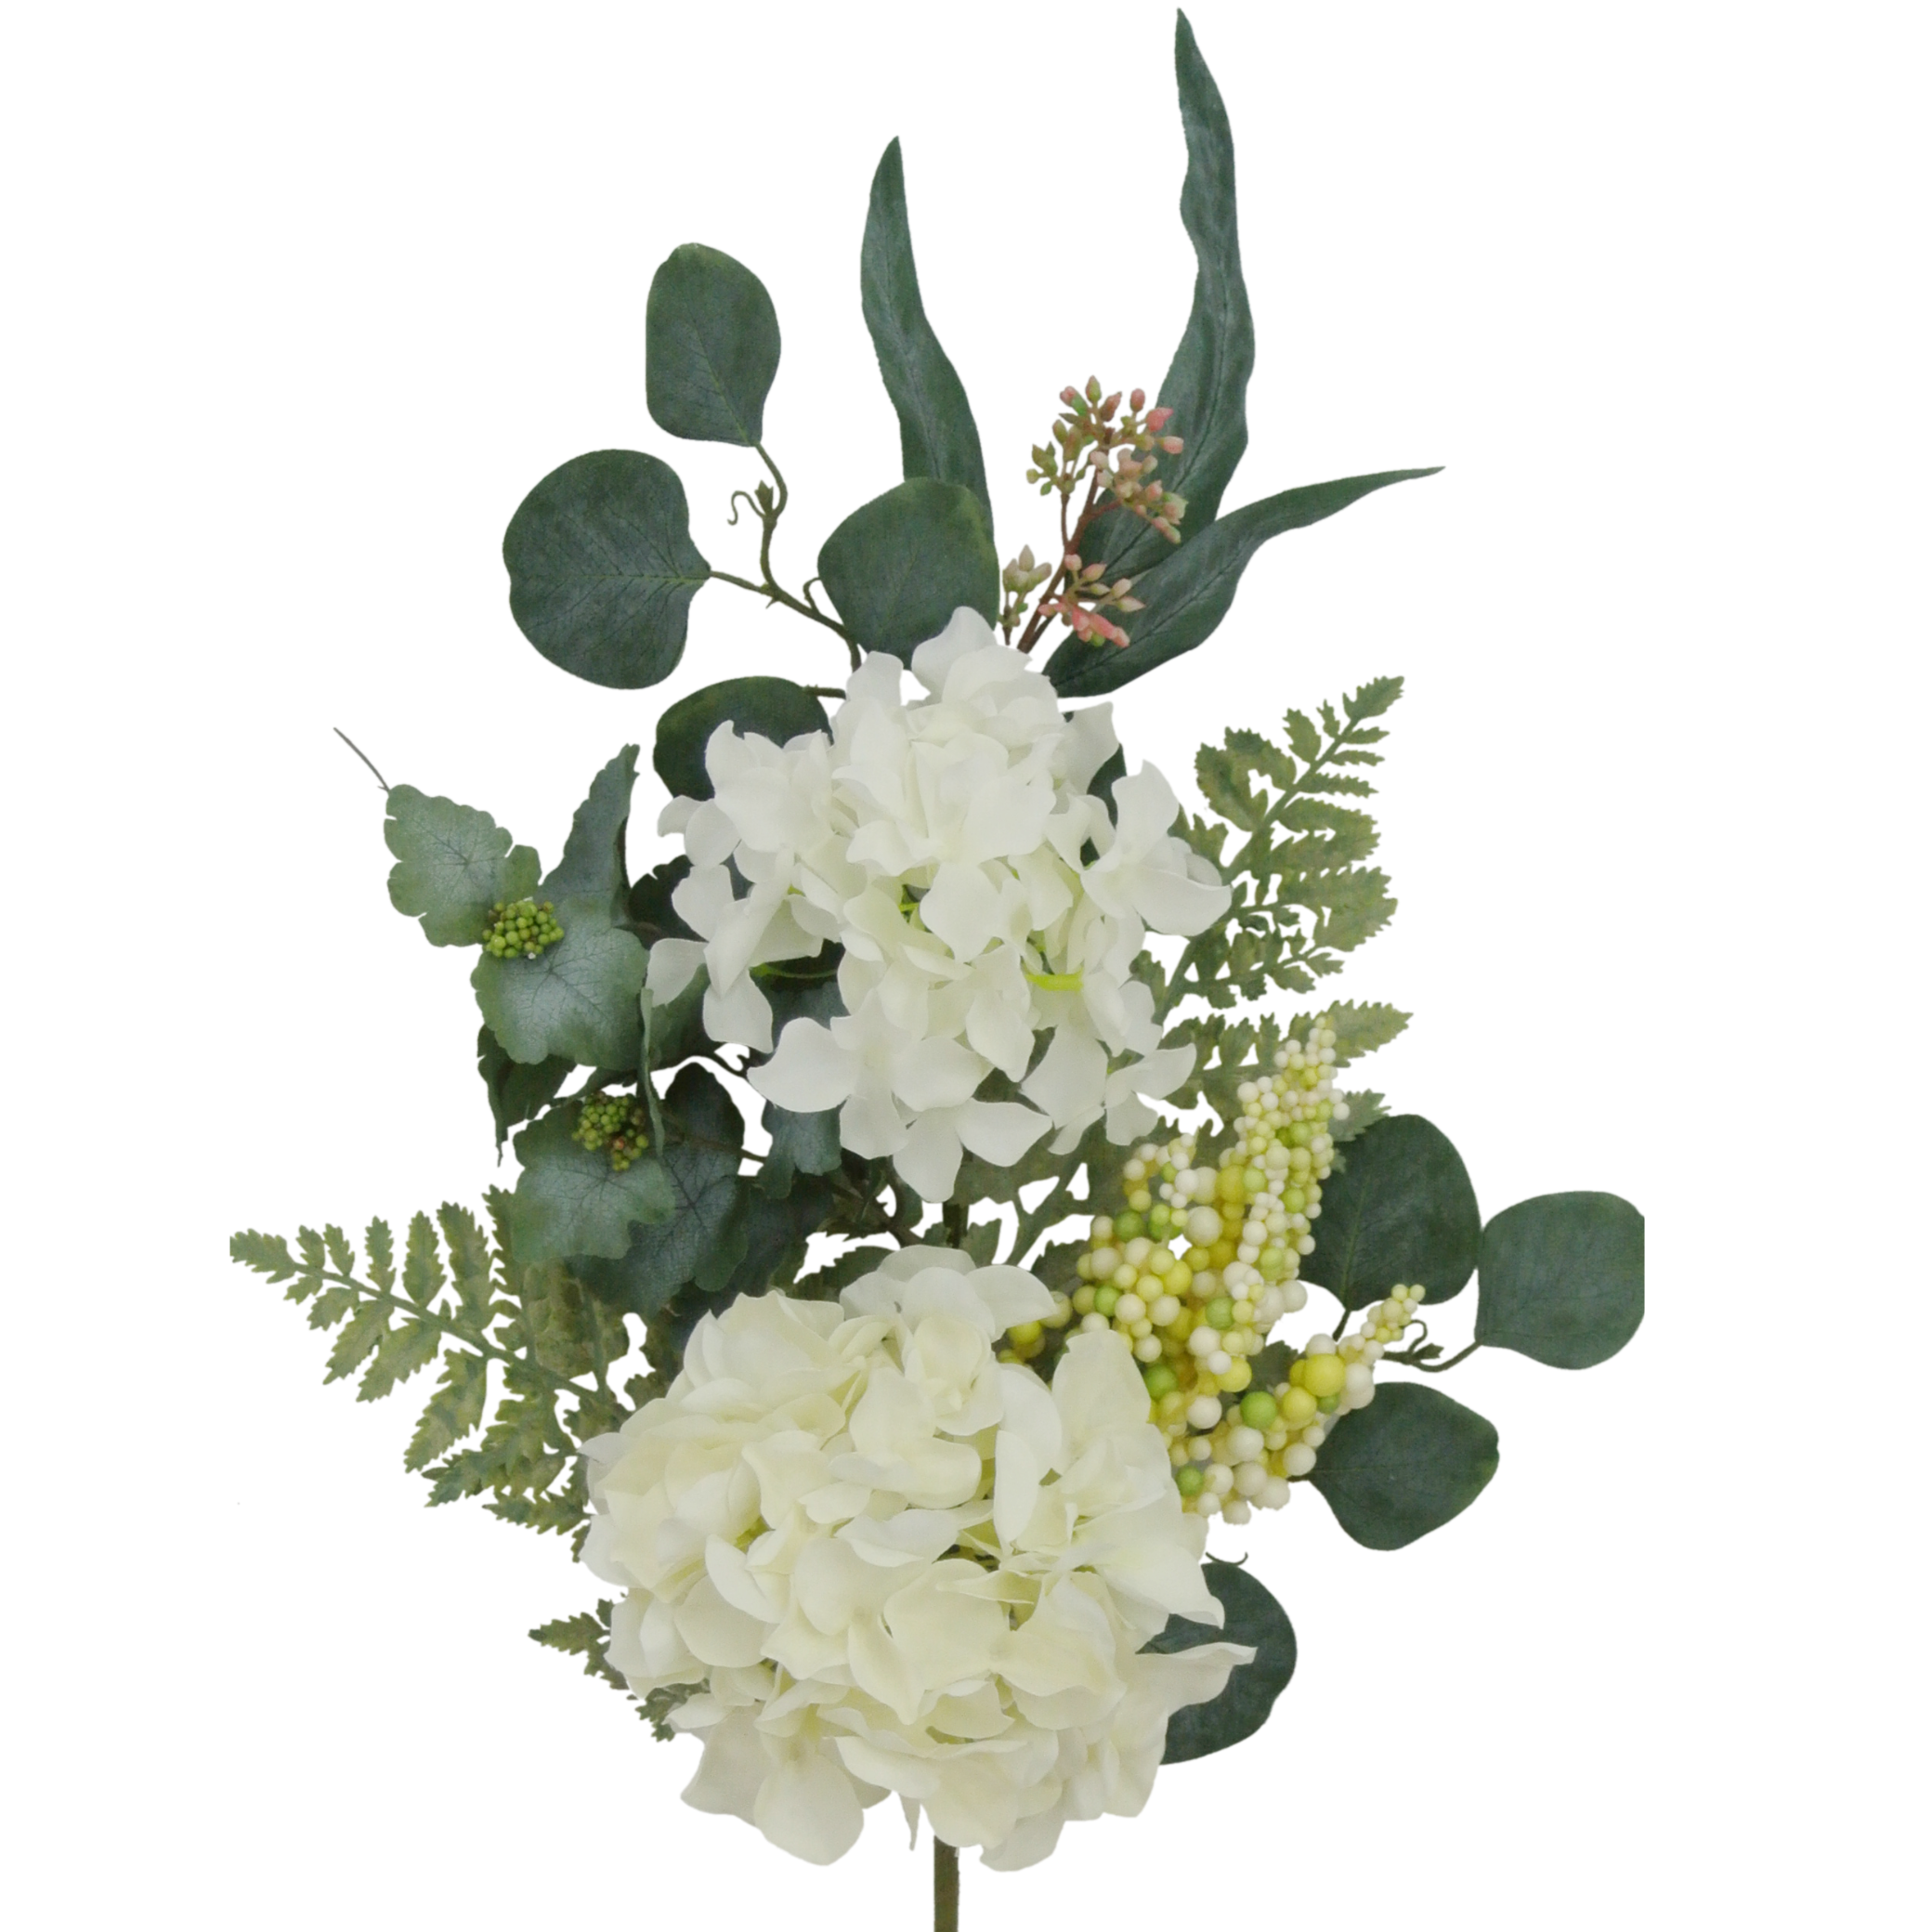 50% off Greenery & Florals - applied in Cart